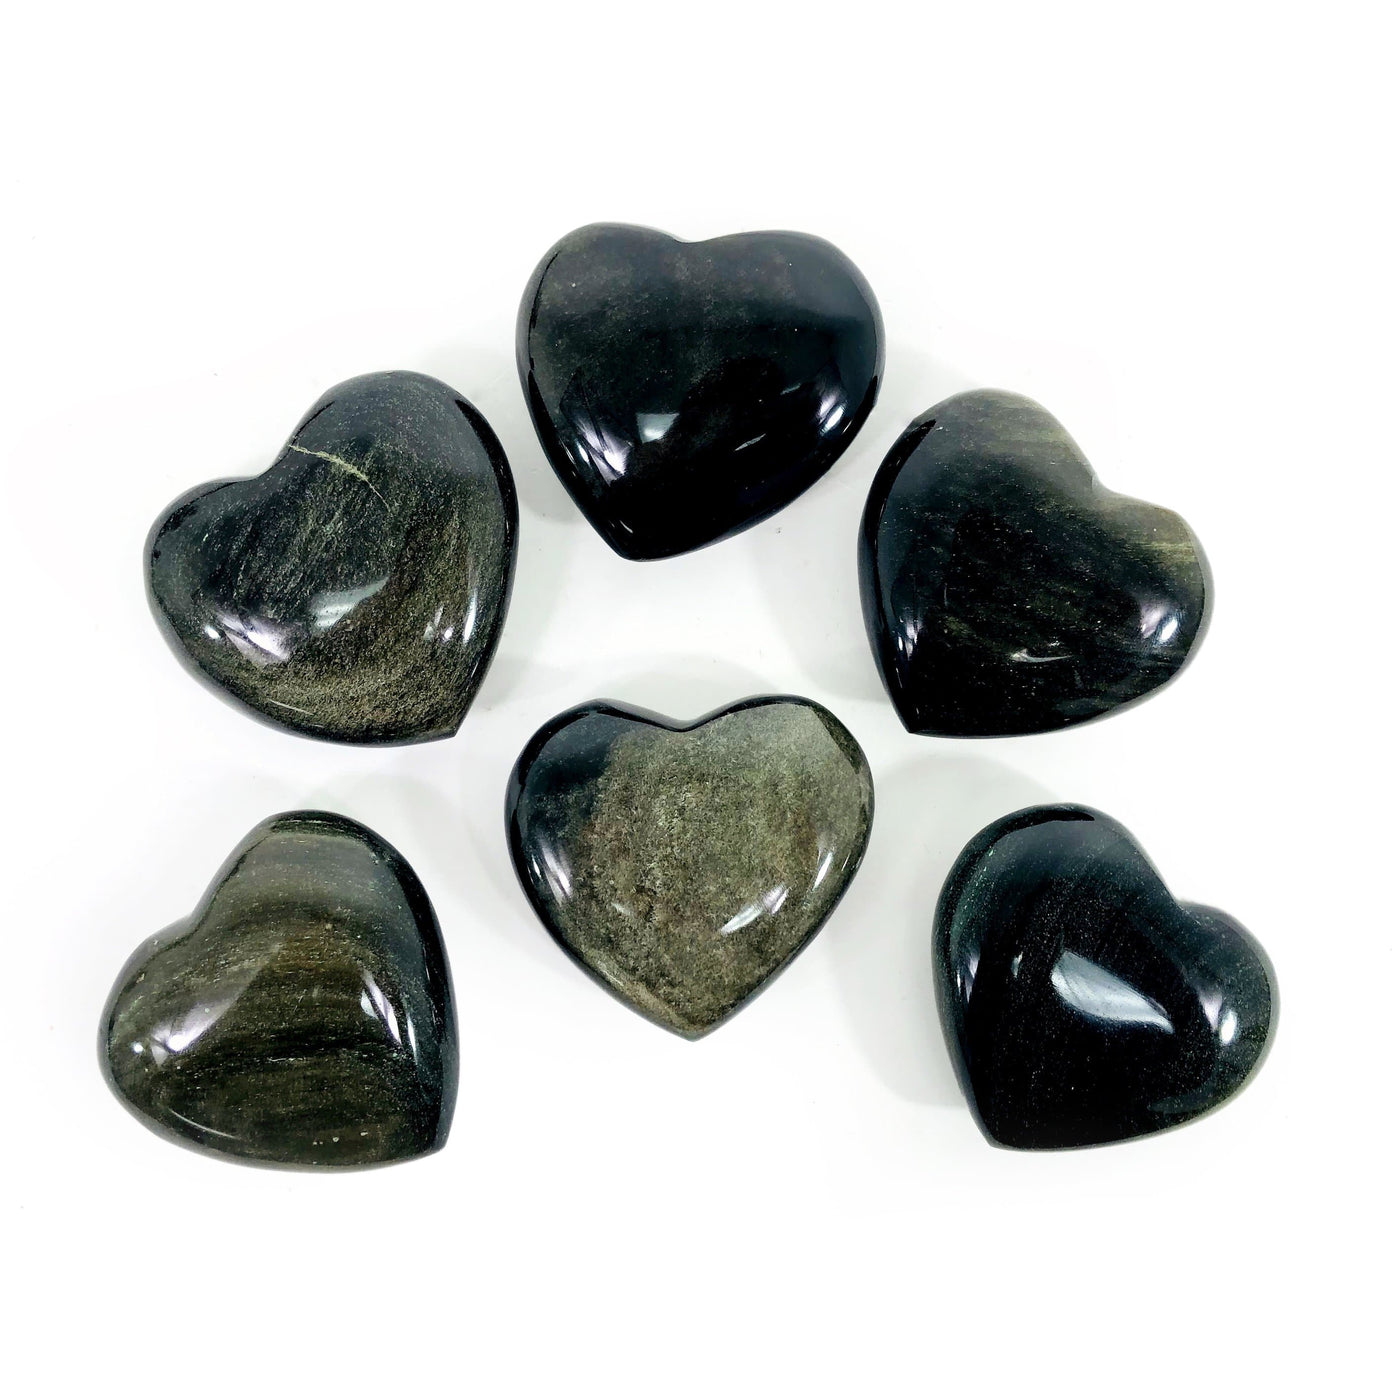 Multiple Polished Gold Sheen Obsidian Hearts displayed to show various sheen and black in stone